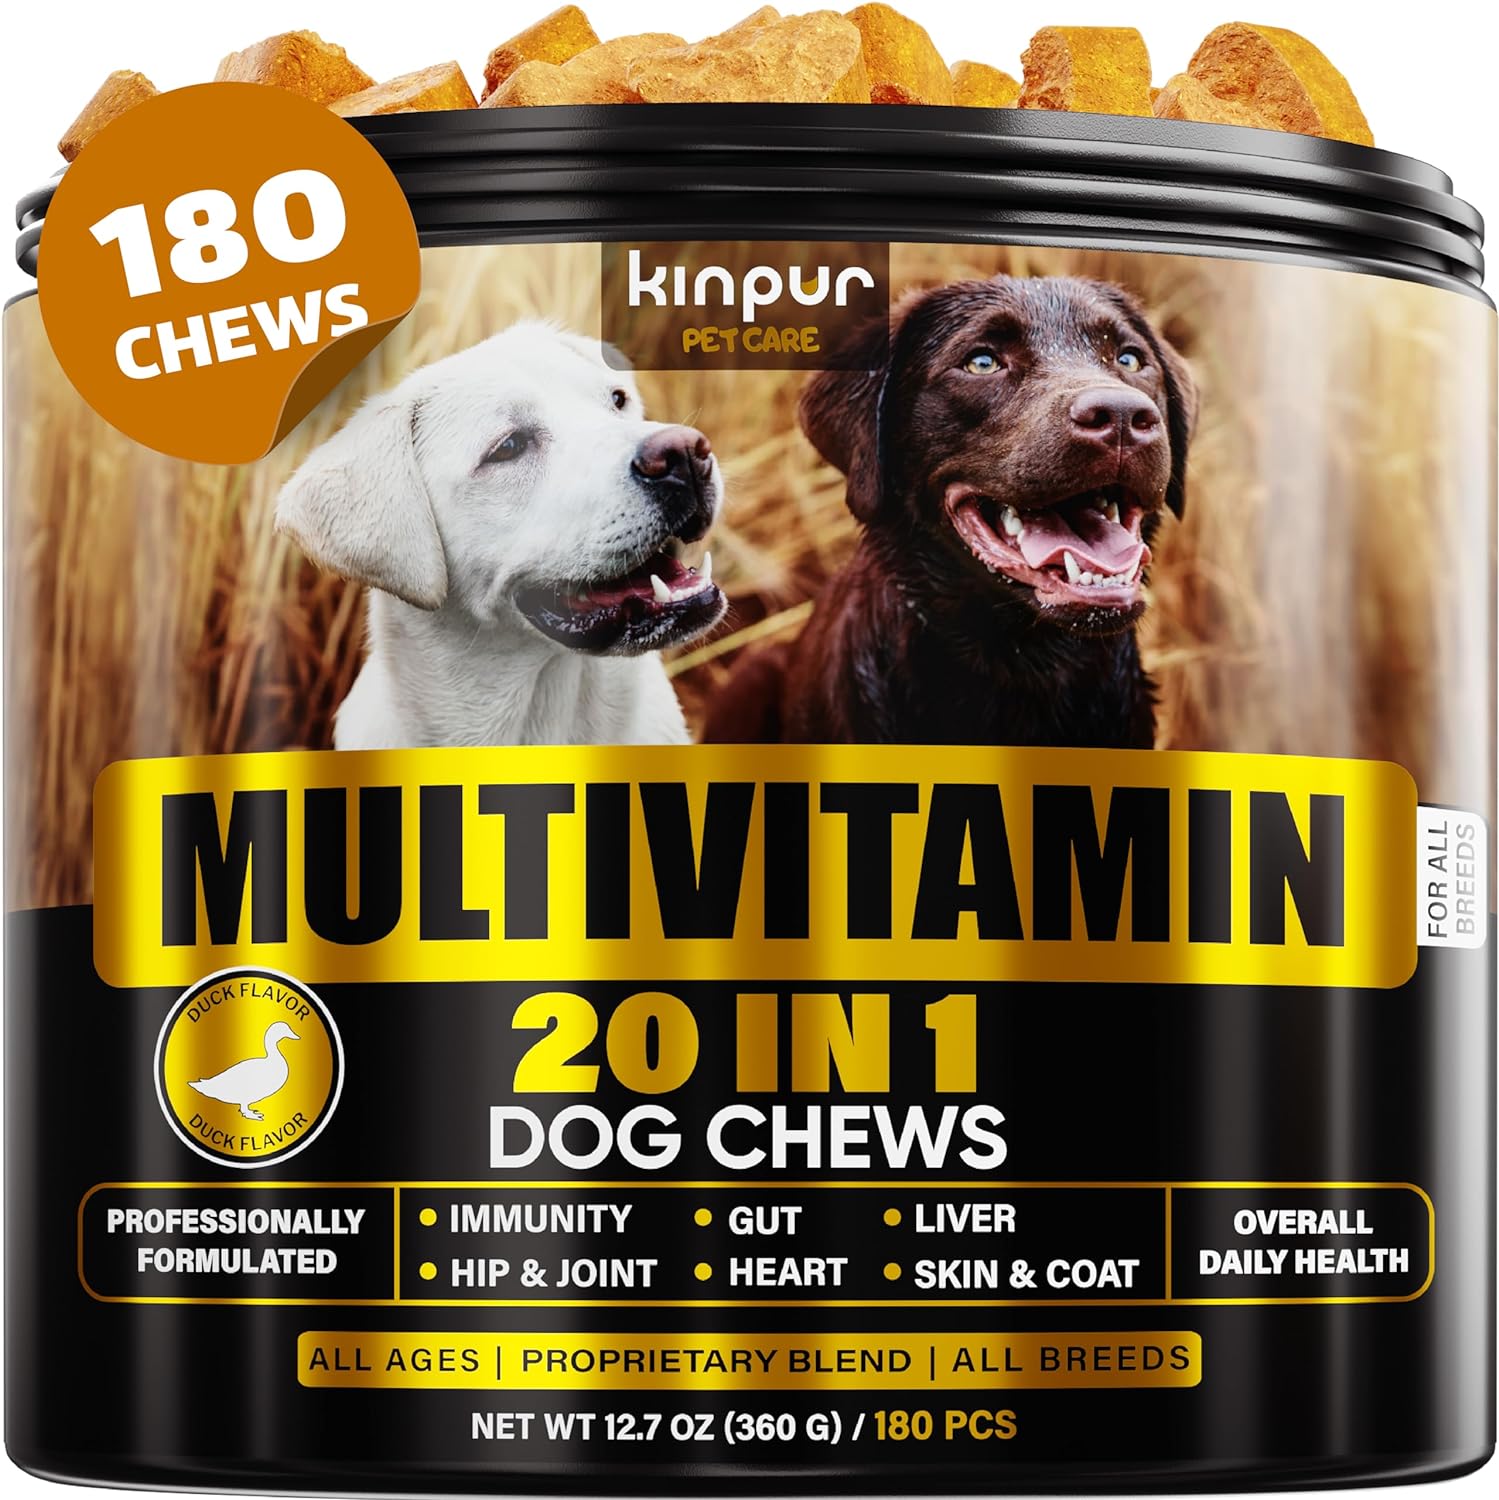 20-in-1 Dog Multivitamin Supplements - Immunity, Digestion, Joint and Heart Health Support - Natural Dog Vitamins with Biotin, Msm, Cranberry, Glucosamine for Dogs - 180 Chews